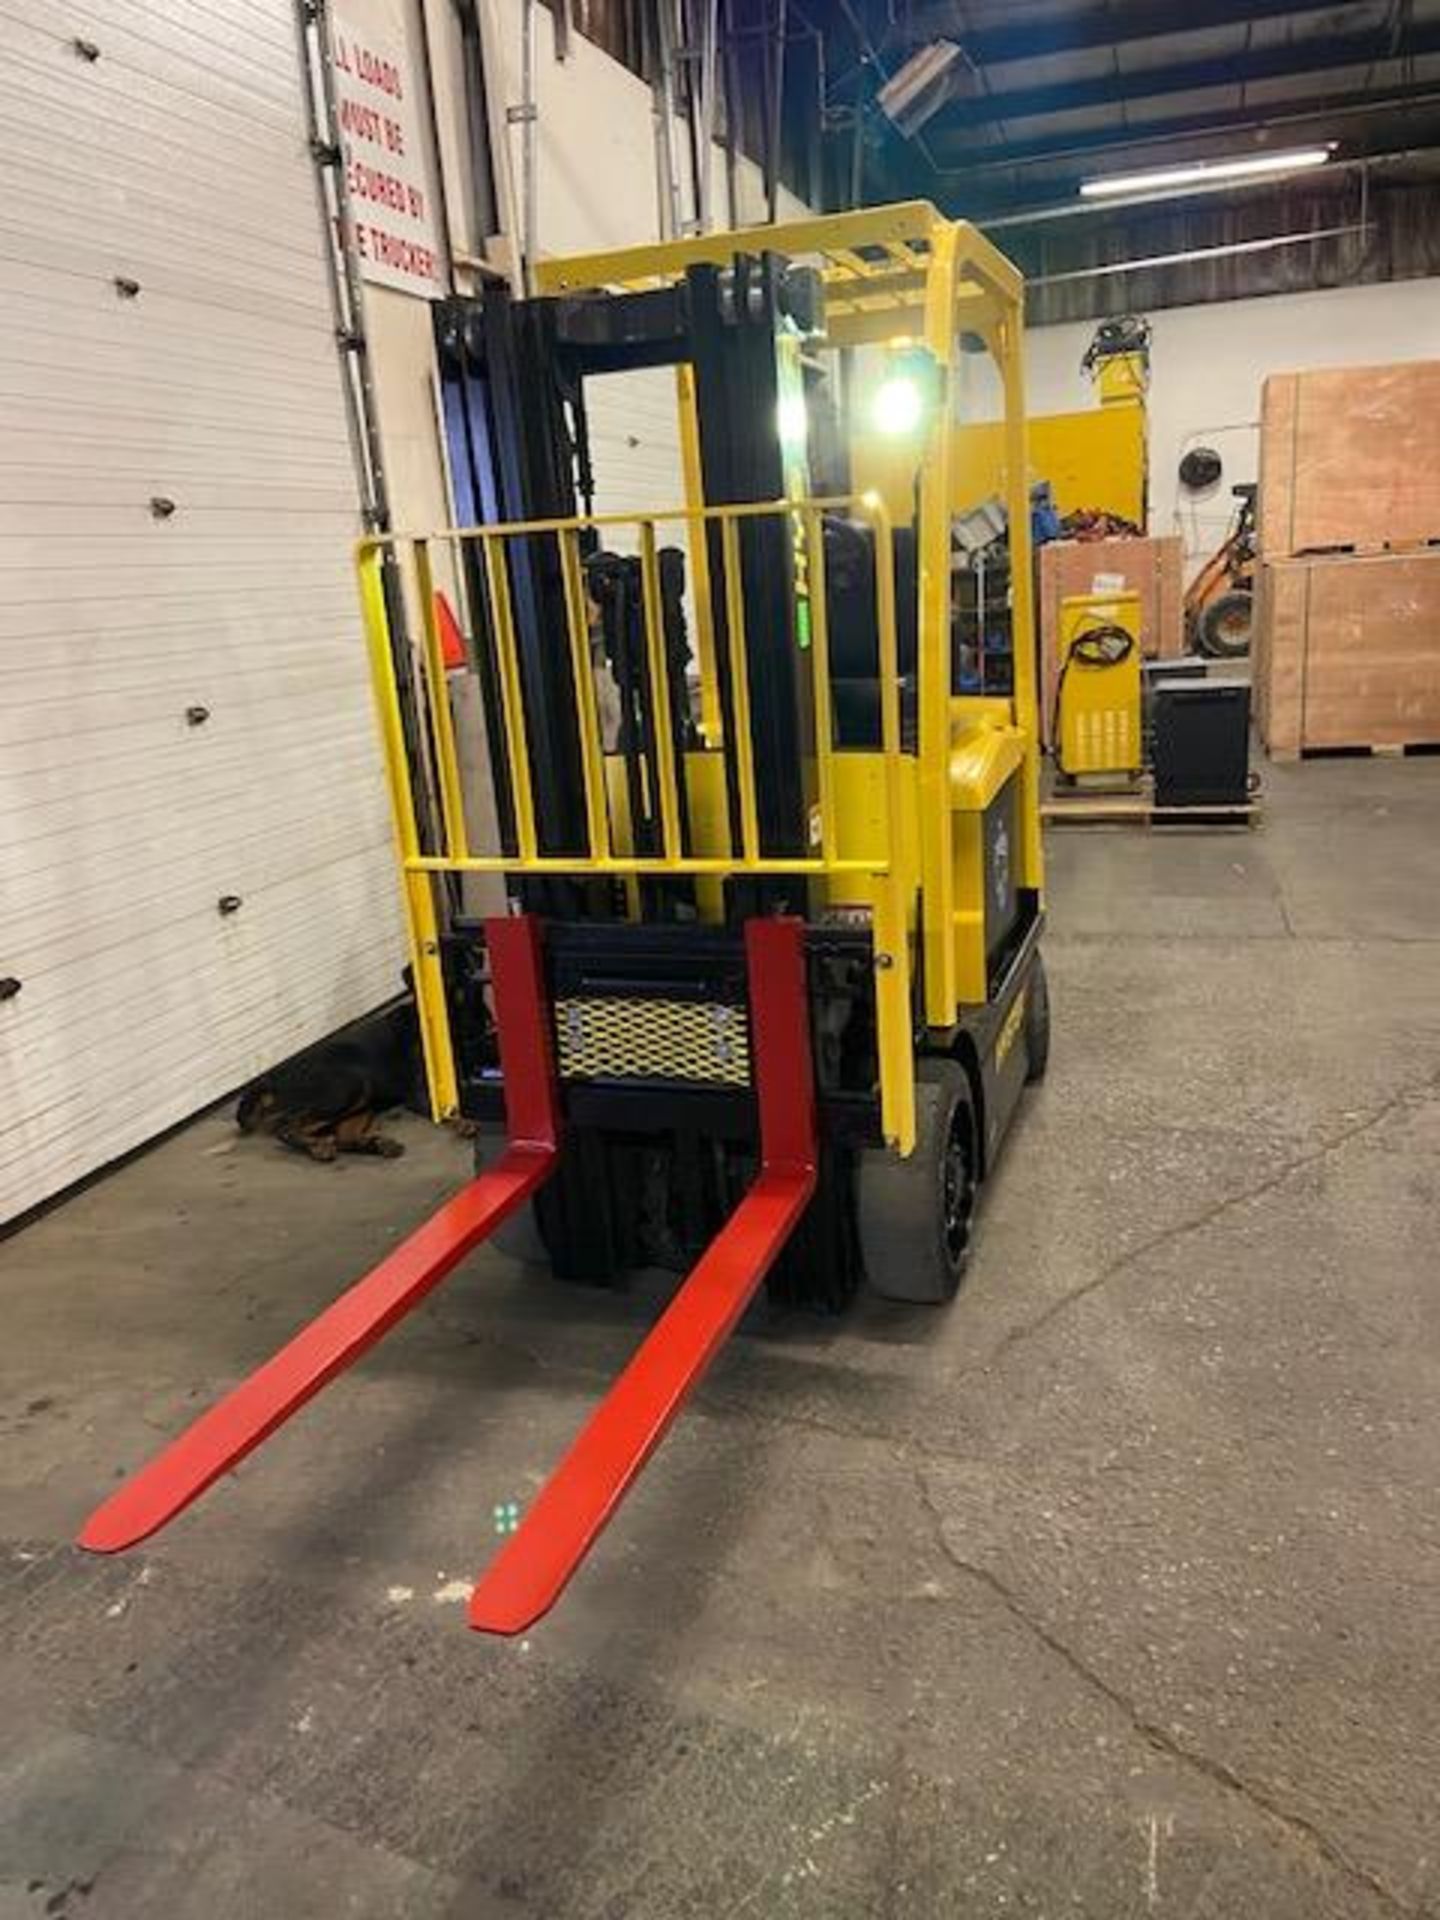 FREE CUSTOMS - 2015 Hyster 5000lbs Capacity Forklift Electric with 3-STAGE MAST with sideshift - Image 2 of 3